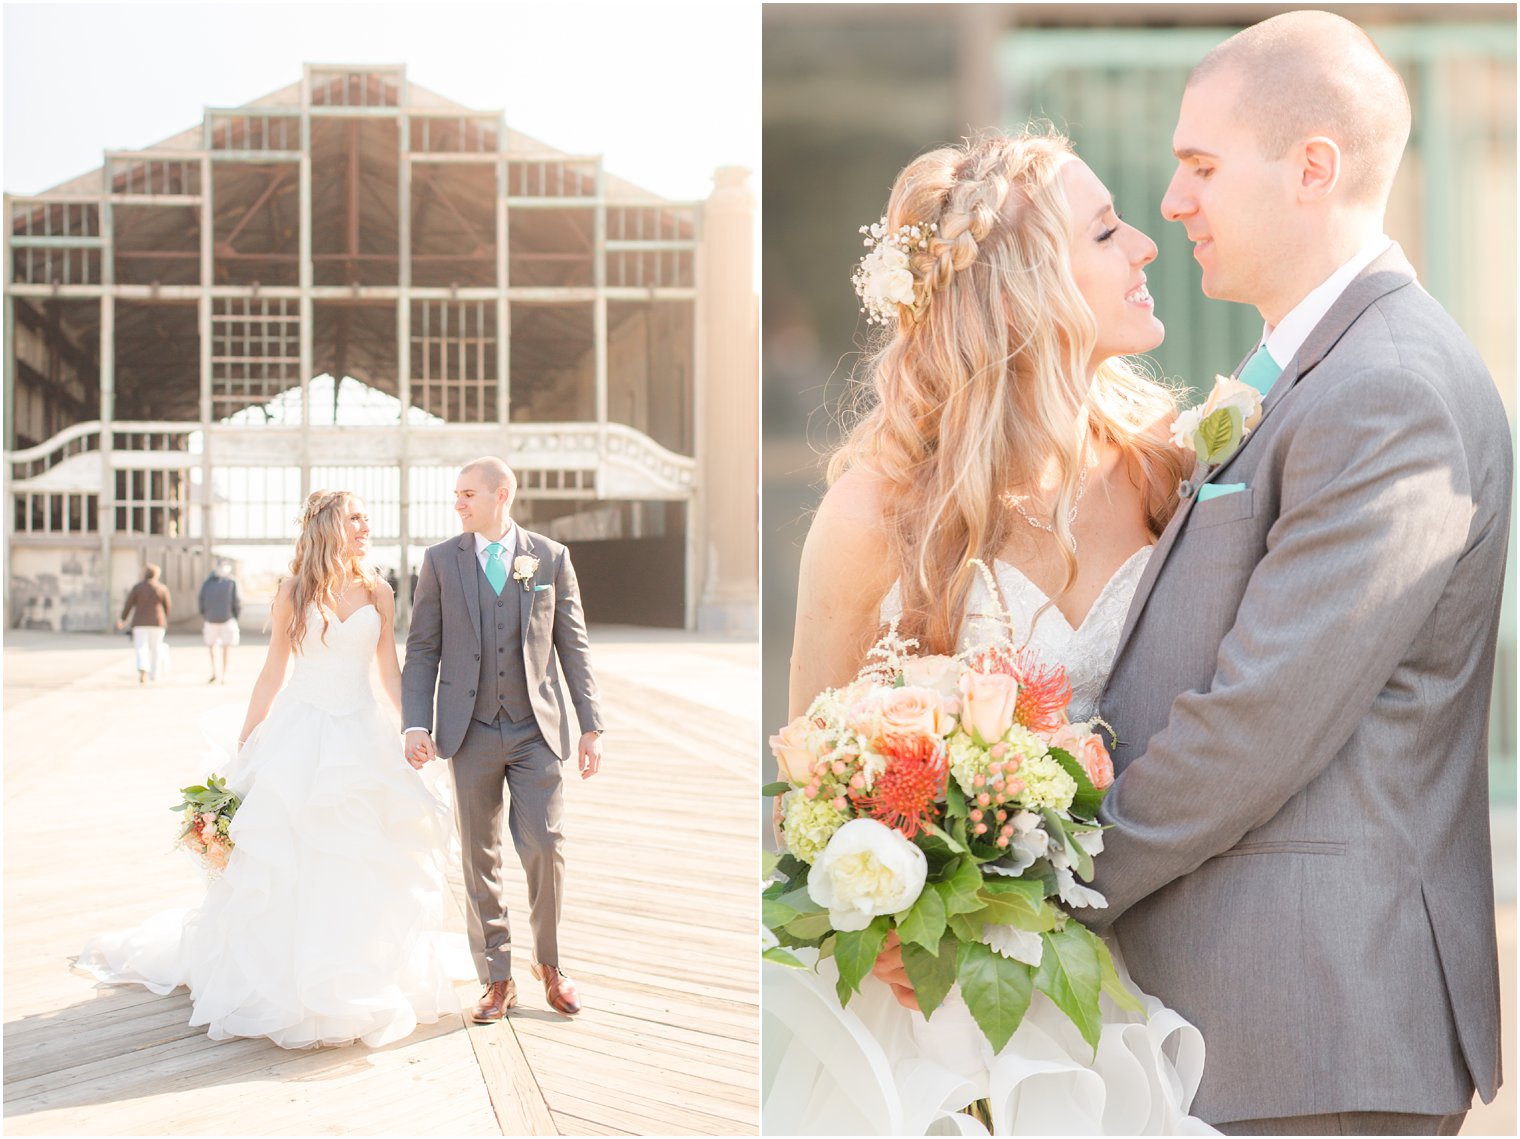 Bride and groom photos on the boardwalk in Asbury Park